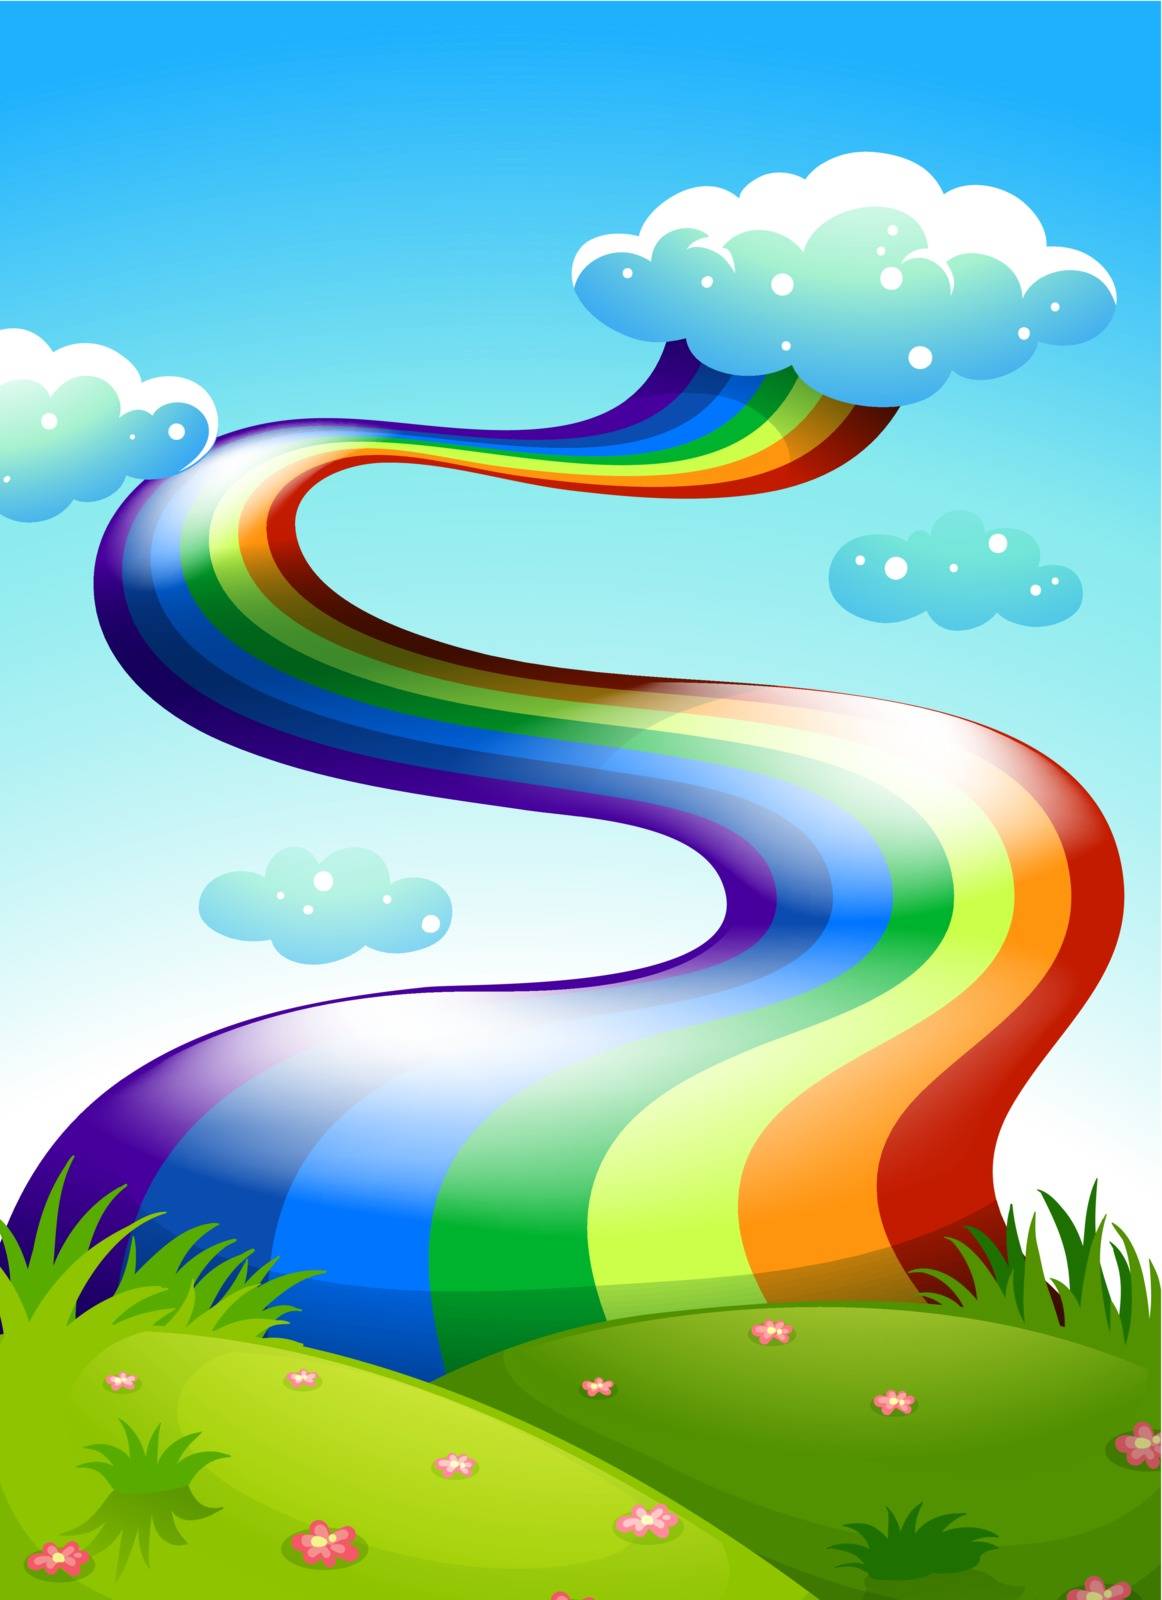 Illustration of a rainbow in the clear blue sky